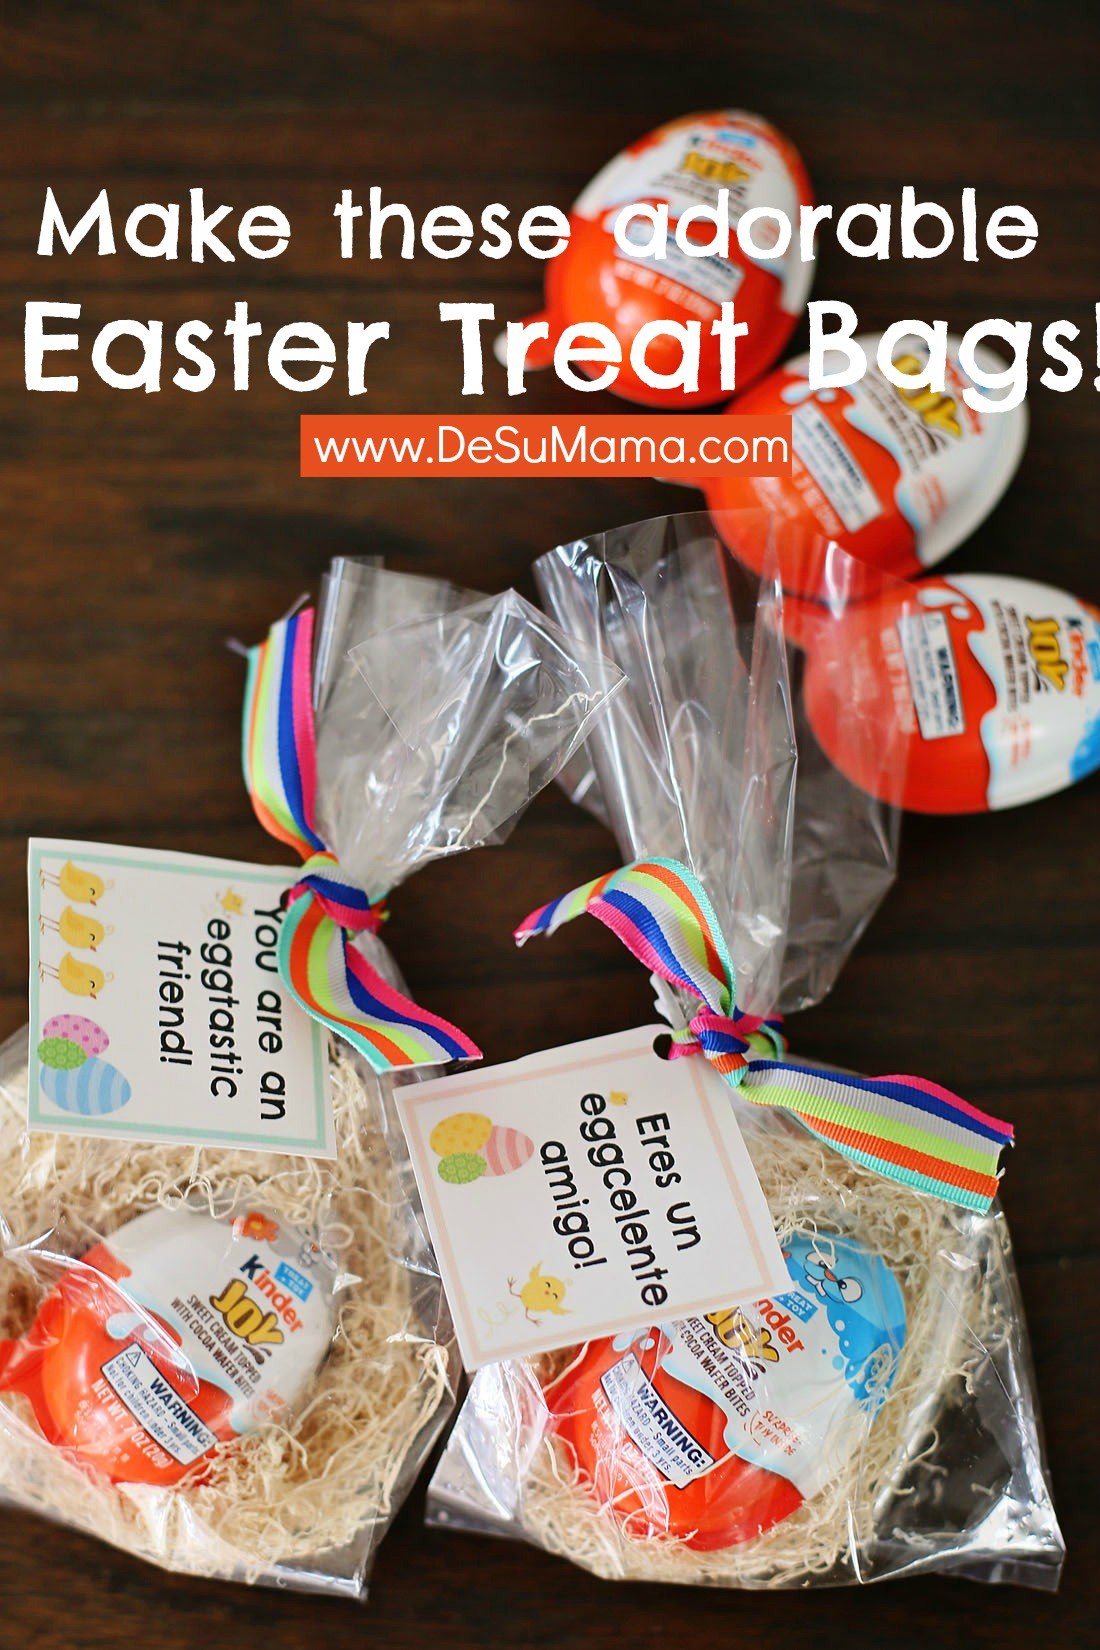 Easter bags with kinder joy treats